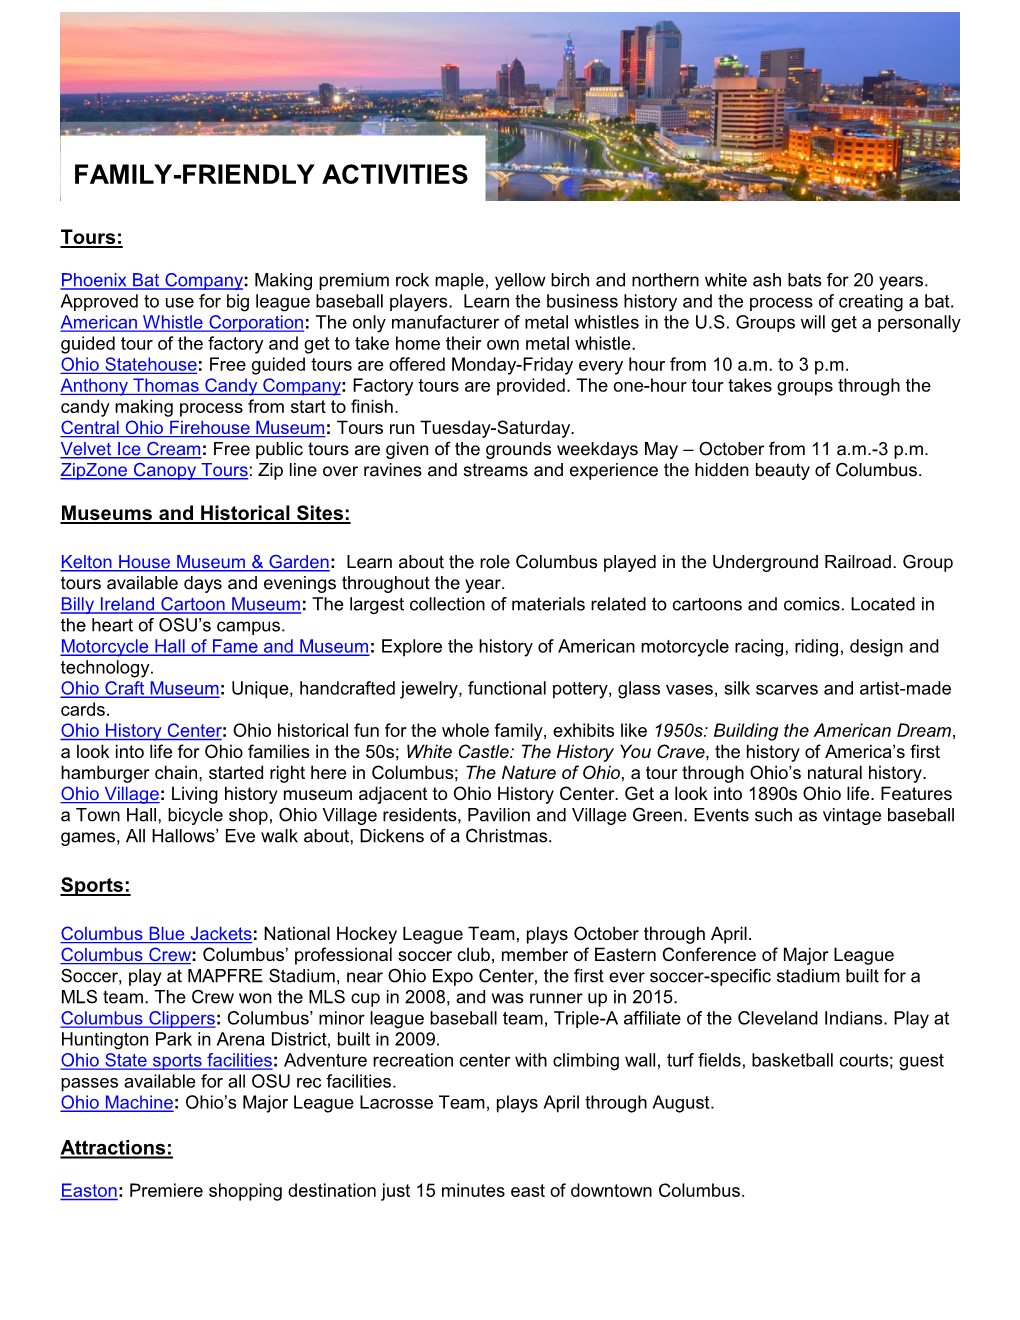 Family-Friendly Activities